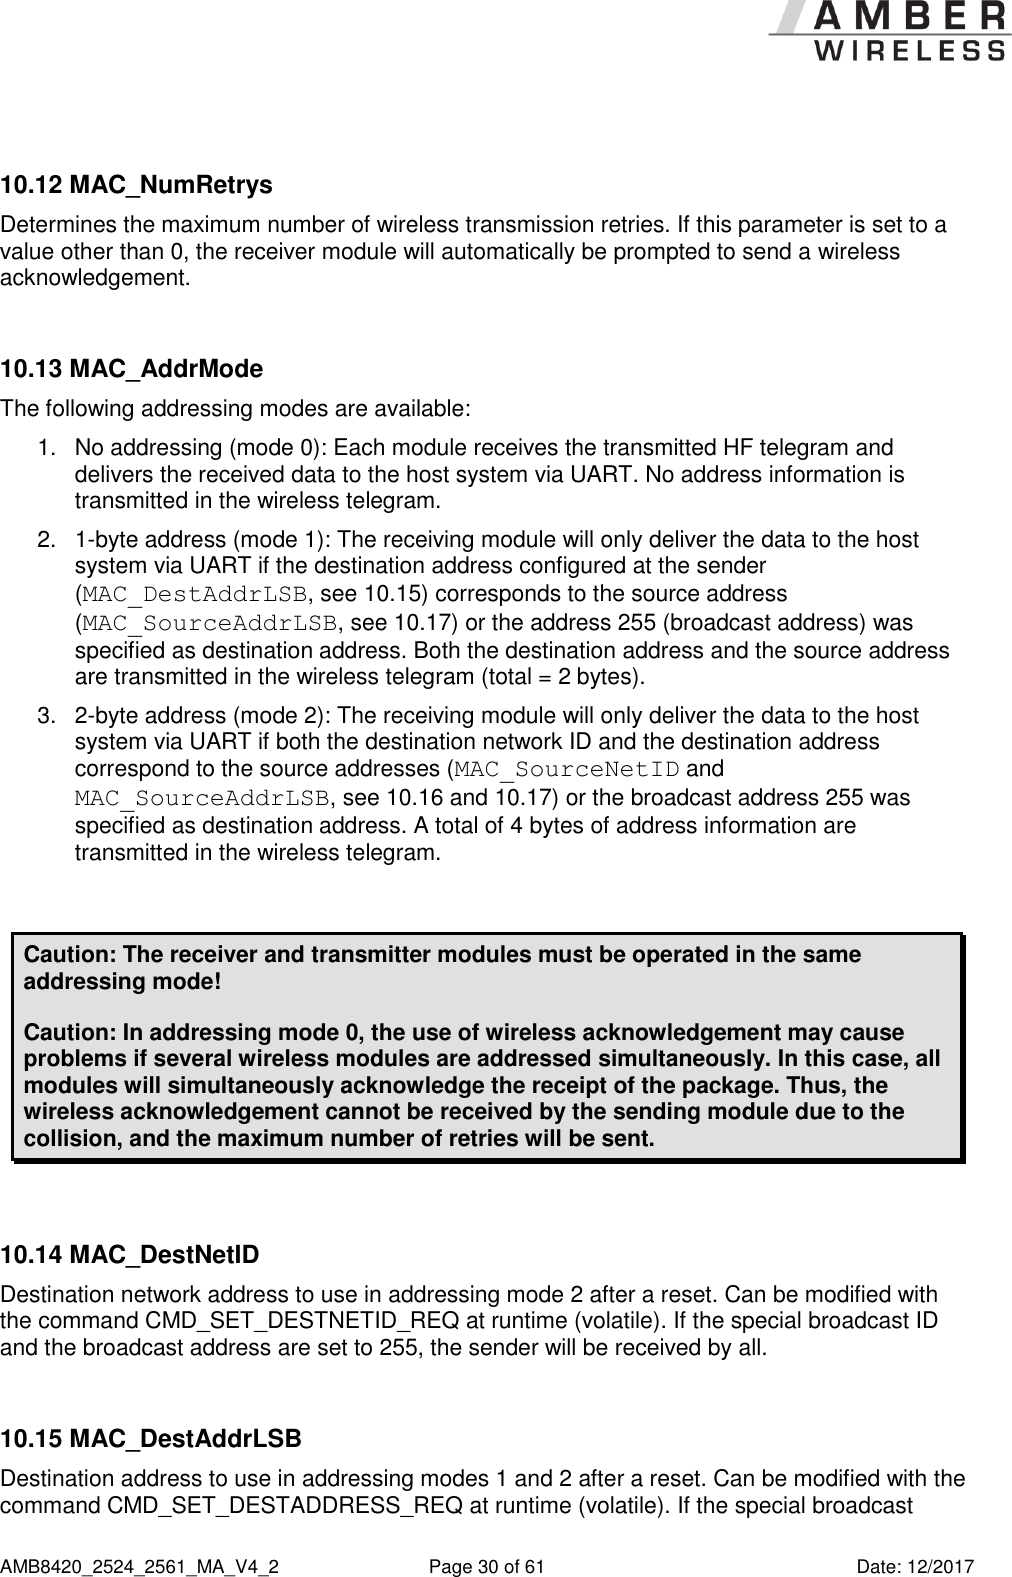      AMB8420_2524_2561_MA_V4_2  Page 30 of 61  Date: 12/2017  10.12 MAC_NumRetrys Determines the maximum number of wireless transmission retries. If this parameter is set to a value other than 0, the receiver module will automatically be prompted to send a wireless acknowledgement.  10.13 MAC_AddrMode The following addressing modes are available: 1.  No addressing (mode 0): Each module receives the transmitted HF telegram and delivers the received data to the host system via UART. No address information is transmitted in the wireless telegram. 2.  1-byte address (mode 1): The receiving module will only deliver the data to the host system via UART if the destination address configured at the sender (MAC_DestAddrLSB, see 10.15) corresponds to the source address (MAC_SourceAddrLSB, see 10.17) or the address 255 (broadcast address) was specified as destination address. Both the destination address and the source address are transmitted in the wireless telegram (total = 2 bytes). 3.  2-byte address (mode 2): The receiving module will only deliver the data to the host system via UART if both the destination network ID and the destination address correspond to the source addresses (MAC_SourceNetID and MAC_SourceAddrLSB, see 10.16 and 10.17) or the broadcast address 255 was specified as destination address. A total of 4 bytes of address information are transmitted in the wireless telegram.  Caution: The receiver and transmitter modules must be operated in the same addressing mode! Caution: In addressing mode 0, the use of wireless acknowledgement may cause problems if several wireless modules are addressed simultaneously. In this case, all modules will simultaneously acknowledge the receipt of the package. Thus, the wireless acknowledgement cannot be received by the sending module due to the collision, and the maximum number of retries will be sent.  10.14 MAC_DestNetID Destination network address to use in addressing mode 2 after a reset. Can be modified with the command CMD_SET_DESTNETID_REQ at runtime (volatile). If the special broadcast ID and the broadcast address are set to 255, the sender will be received by all.  10.15 MAC_DestAddrLSB Destination address to use in addressing modes 1 and 2 after a reset. Can be modified with the command CMD_SET_DESTADDRESS_REQ at runtime (volatile). If the special broadcast 